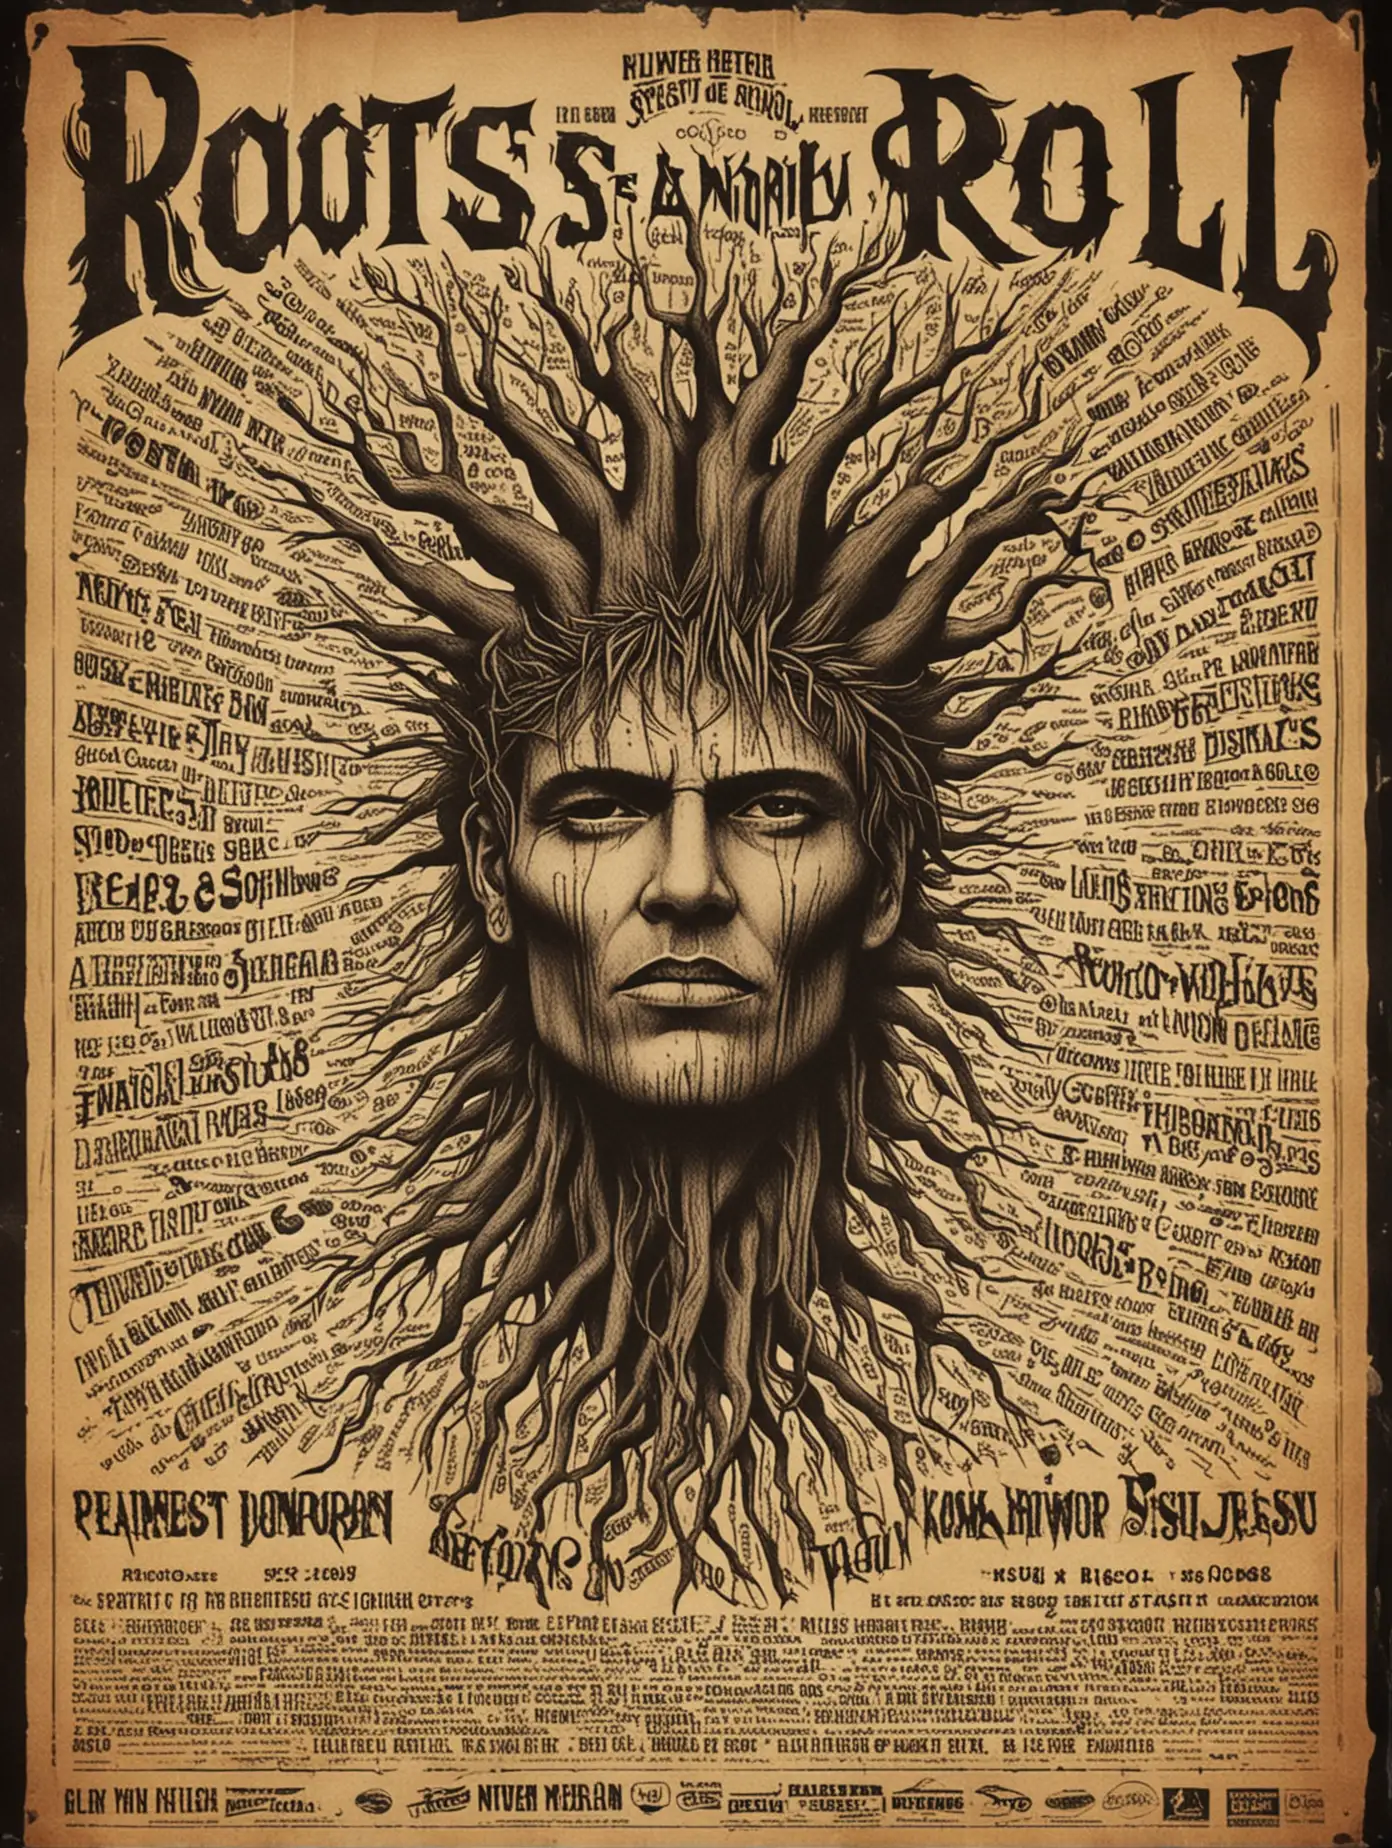 rock music poster for roots of rock and roll covering songs from beginning of rock